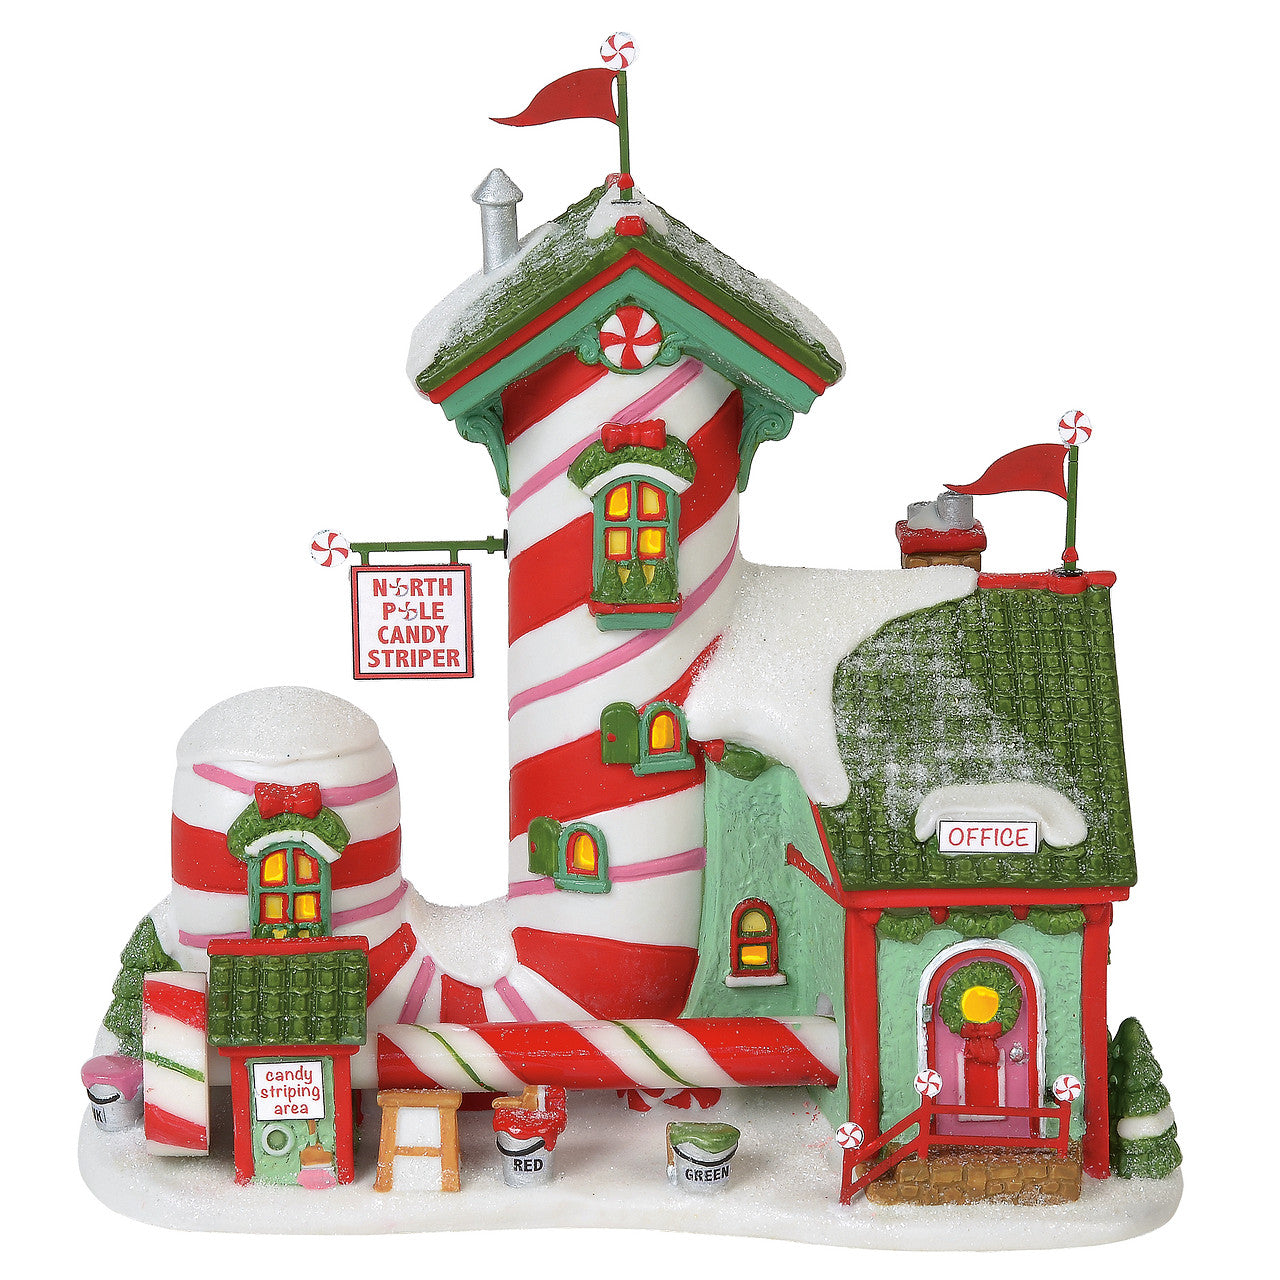 Department 56 North Pole Candy Striper  If you have ever wondered how candy canes get their stripes, this whimsical factory at the North Pole reveals the trade secrets.